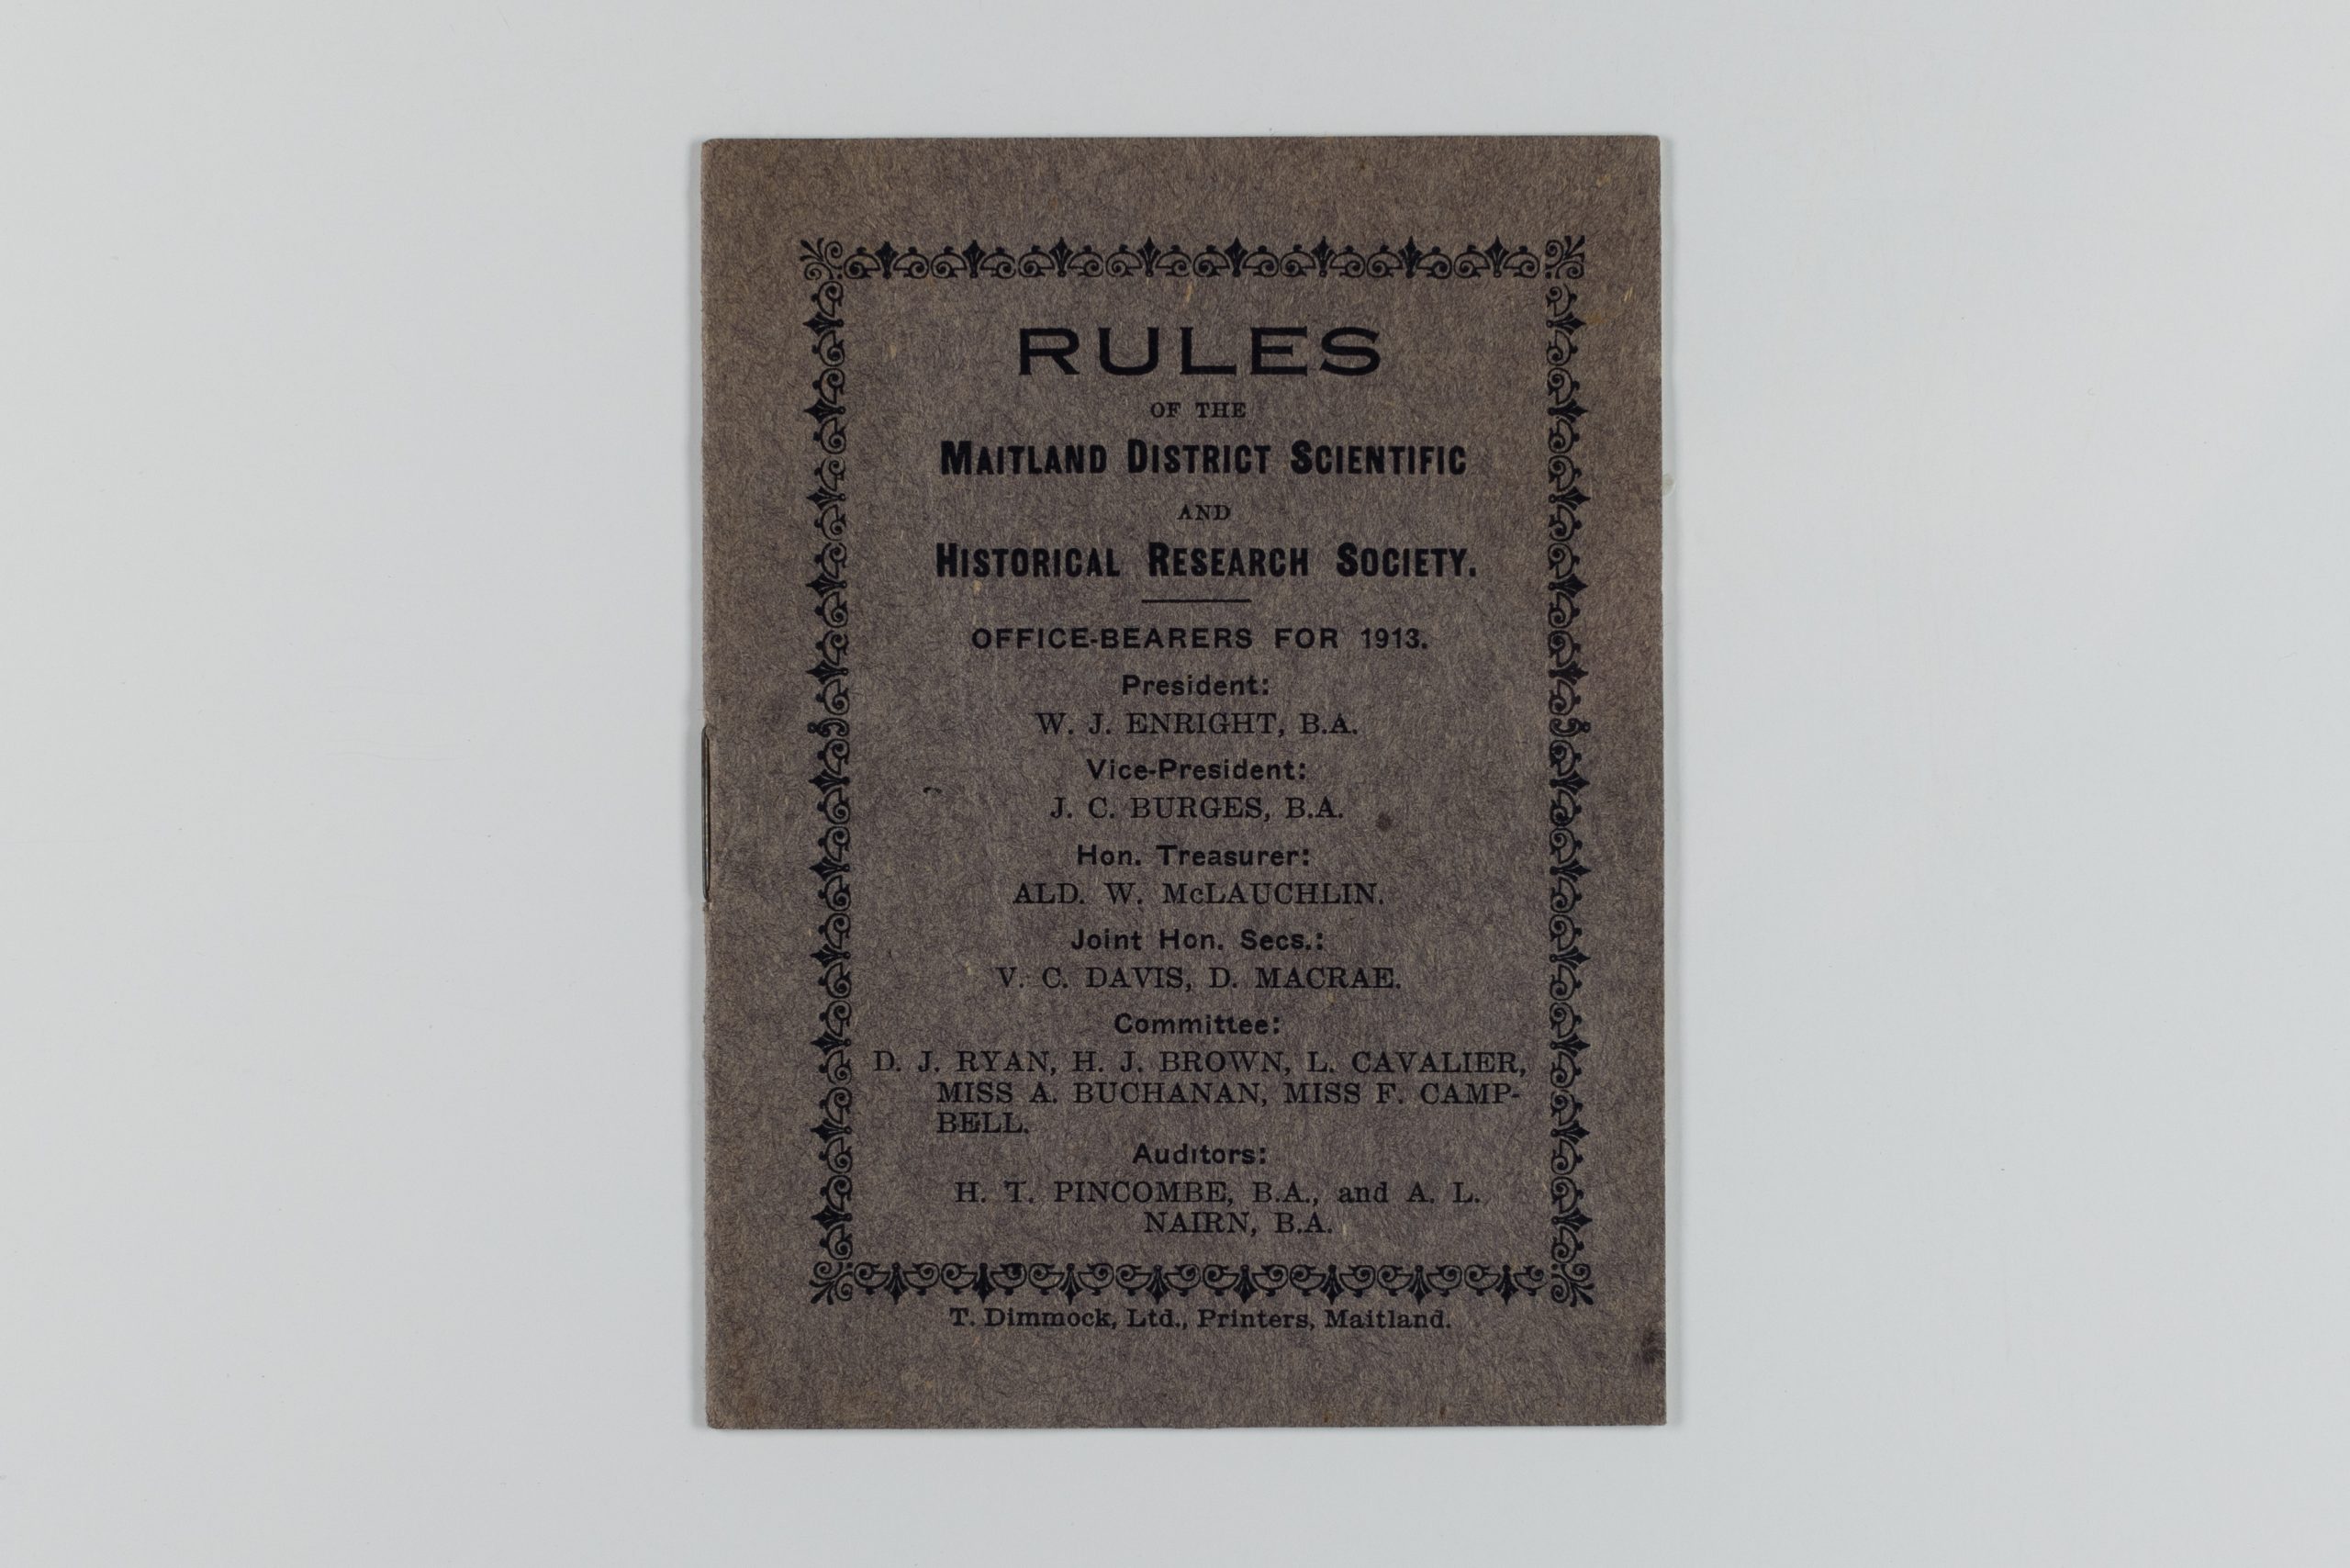 Front cover of brown, slightly tarnished book. It reads: "RULES OF THE MAITLAND DISTRICT SCIENTIFIC AND HISTORICAL RESEARCH SOCIETY. OFFICE-BEARERS FOR 1913. President: W.J. Enright, B.A. Vice-President: J.C. Burges, B.A. Hon. Treasurer: ALD. W. McLauchlin. Joint Hon. Secs: V.C. Davis, D. Macrae. Committee: D.J. Ryan, H.J. Brown, L. Cavalier, Miss A. Buchanan, Miss F. Campbell. AuditorsL H.T. Pincombe, B.A., snd Nairn, B.A. T. Dimmock, Ltd., Printers, Maitland"